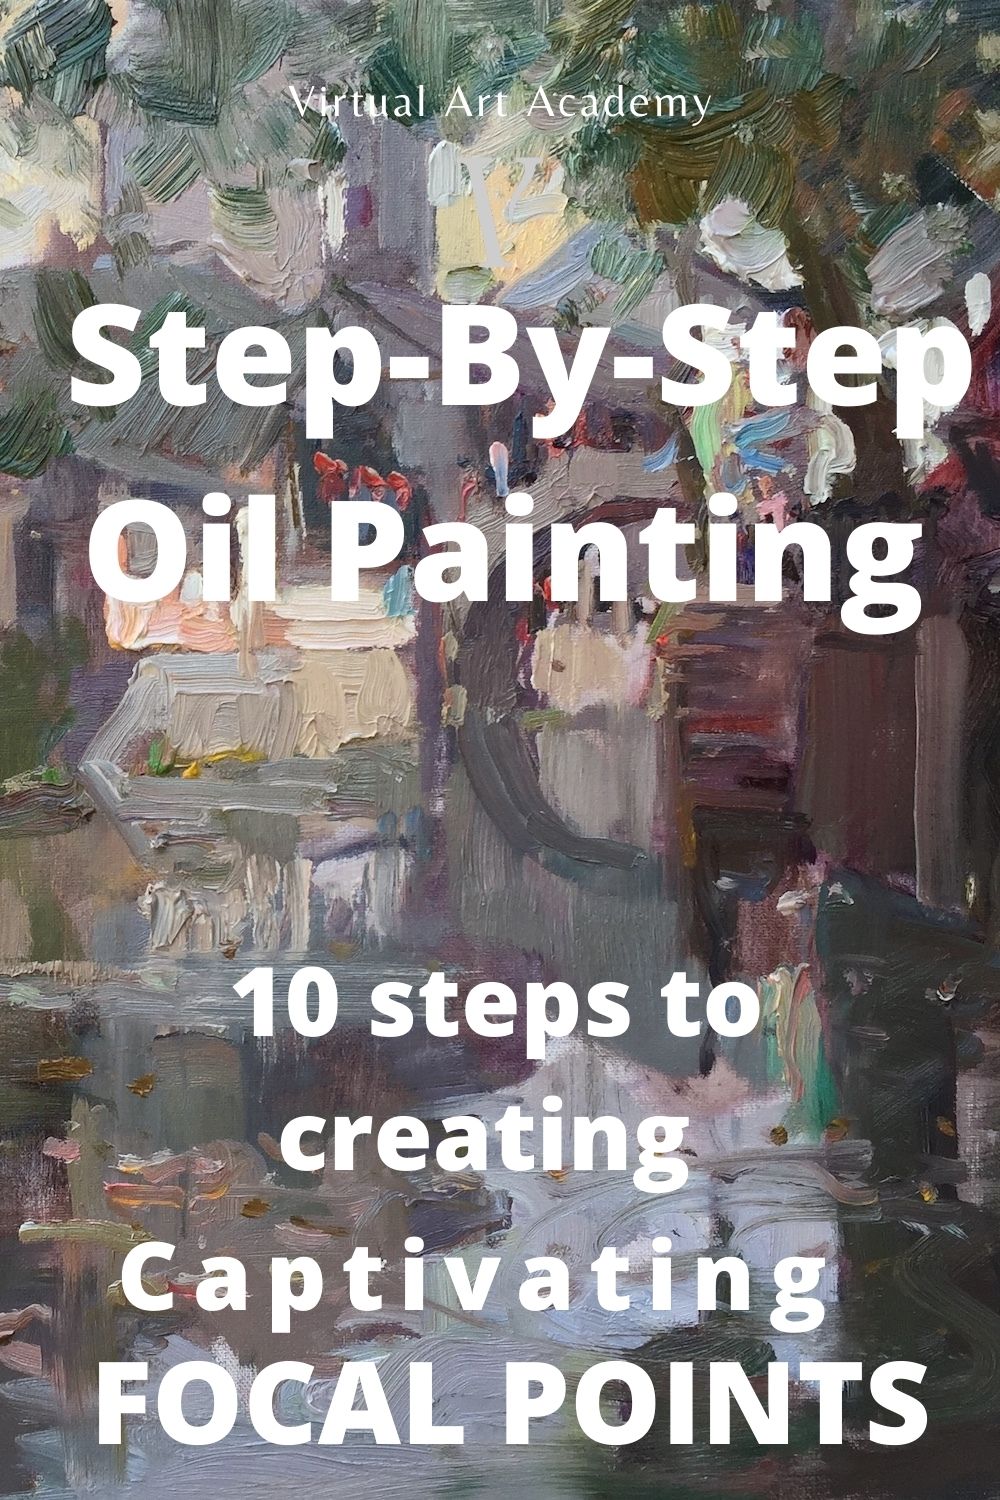 Step By Step Oil Painting Demonstration - Xinchang Village